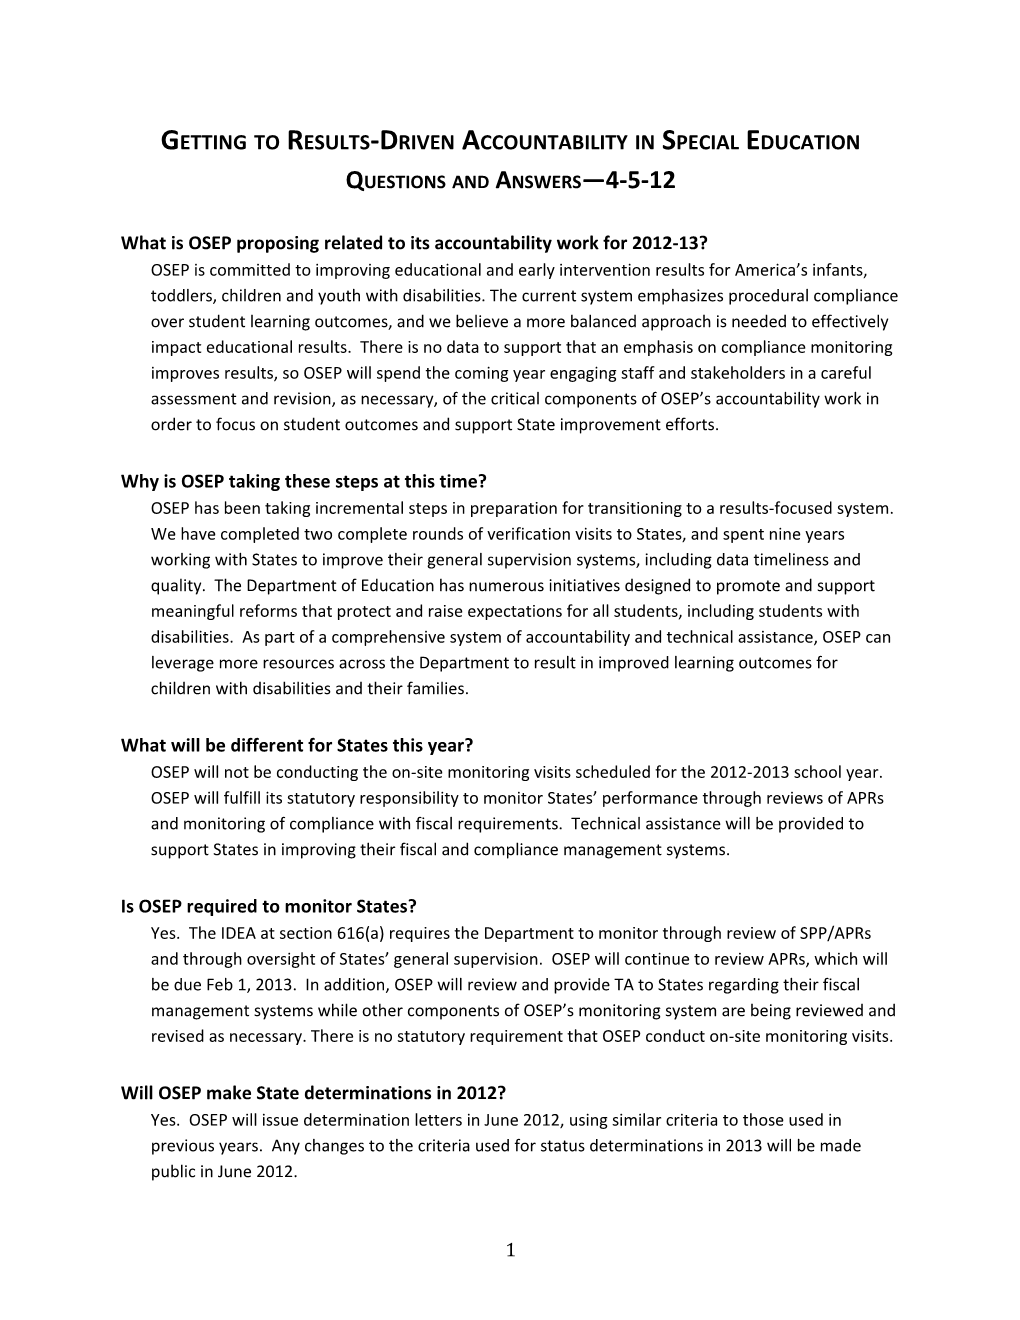 Getting to Results-Driven Accountability in Special Education. Questions and Answers 4-5-12